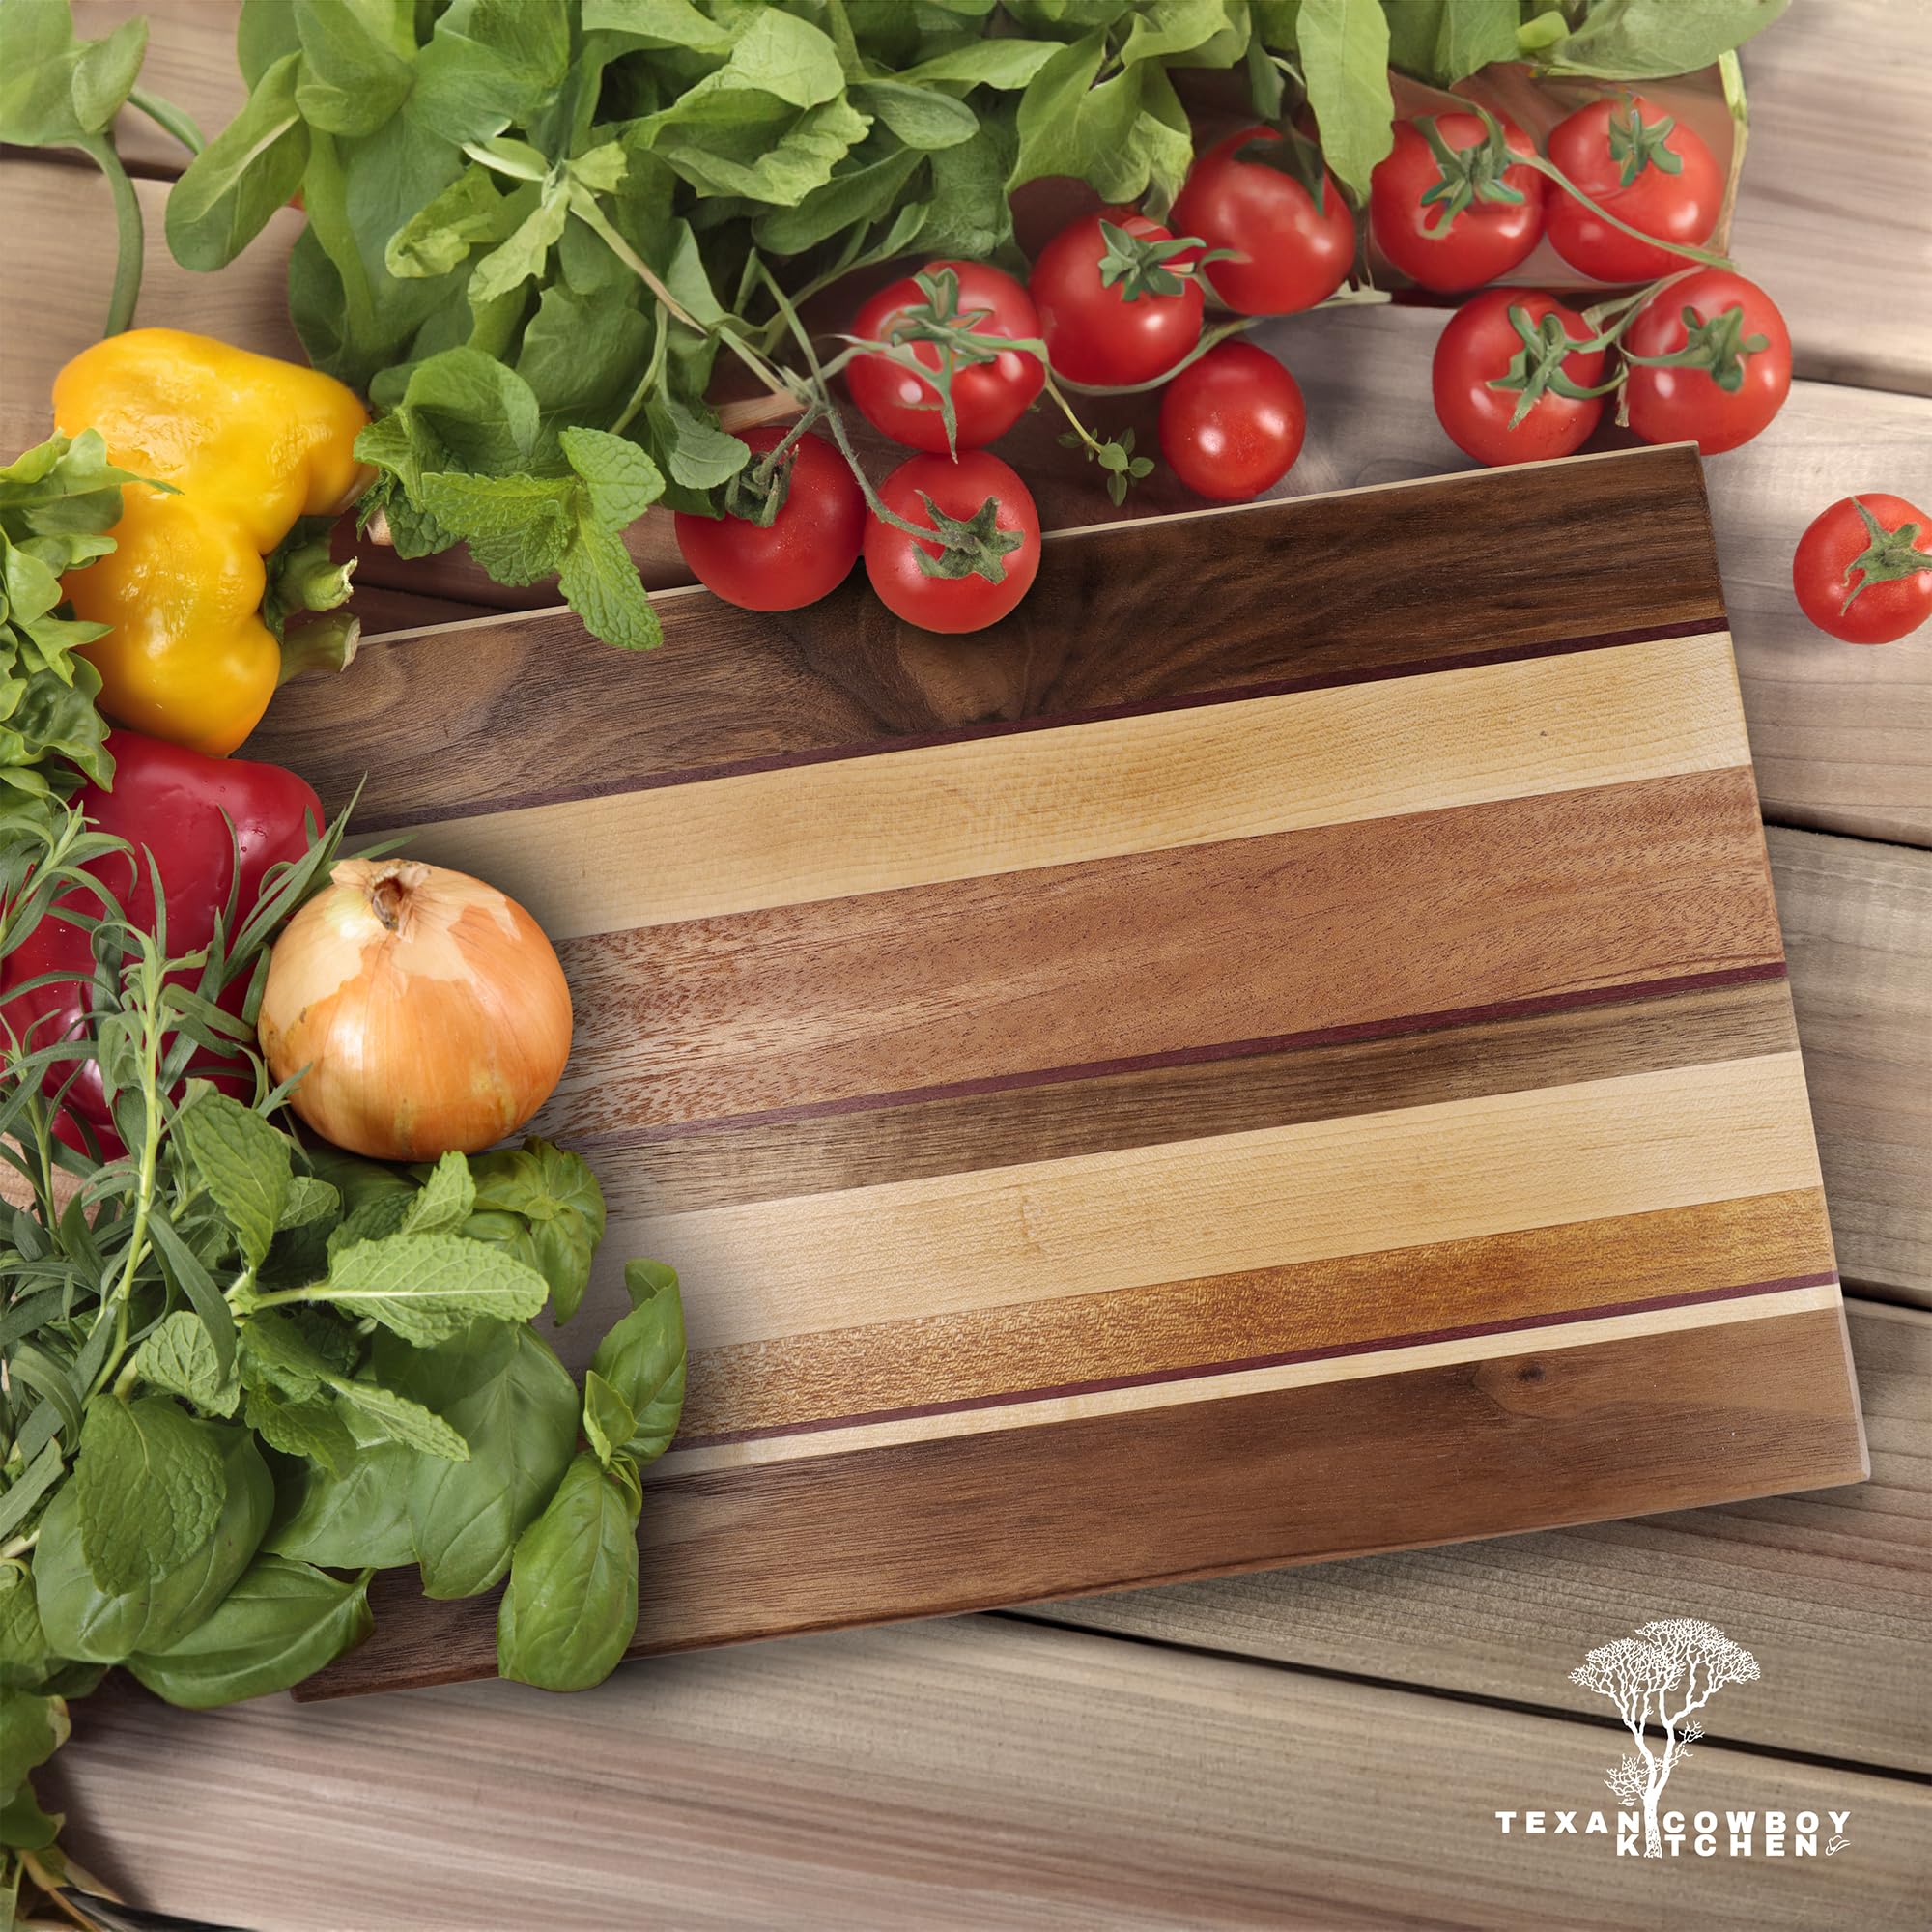 Made in USA Wood Cutting Board by Texan Cowboy Kitchen - Handcrafted in Texas - American Made Cutting Board, 15 x 9 made from Sustainable Hardwood